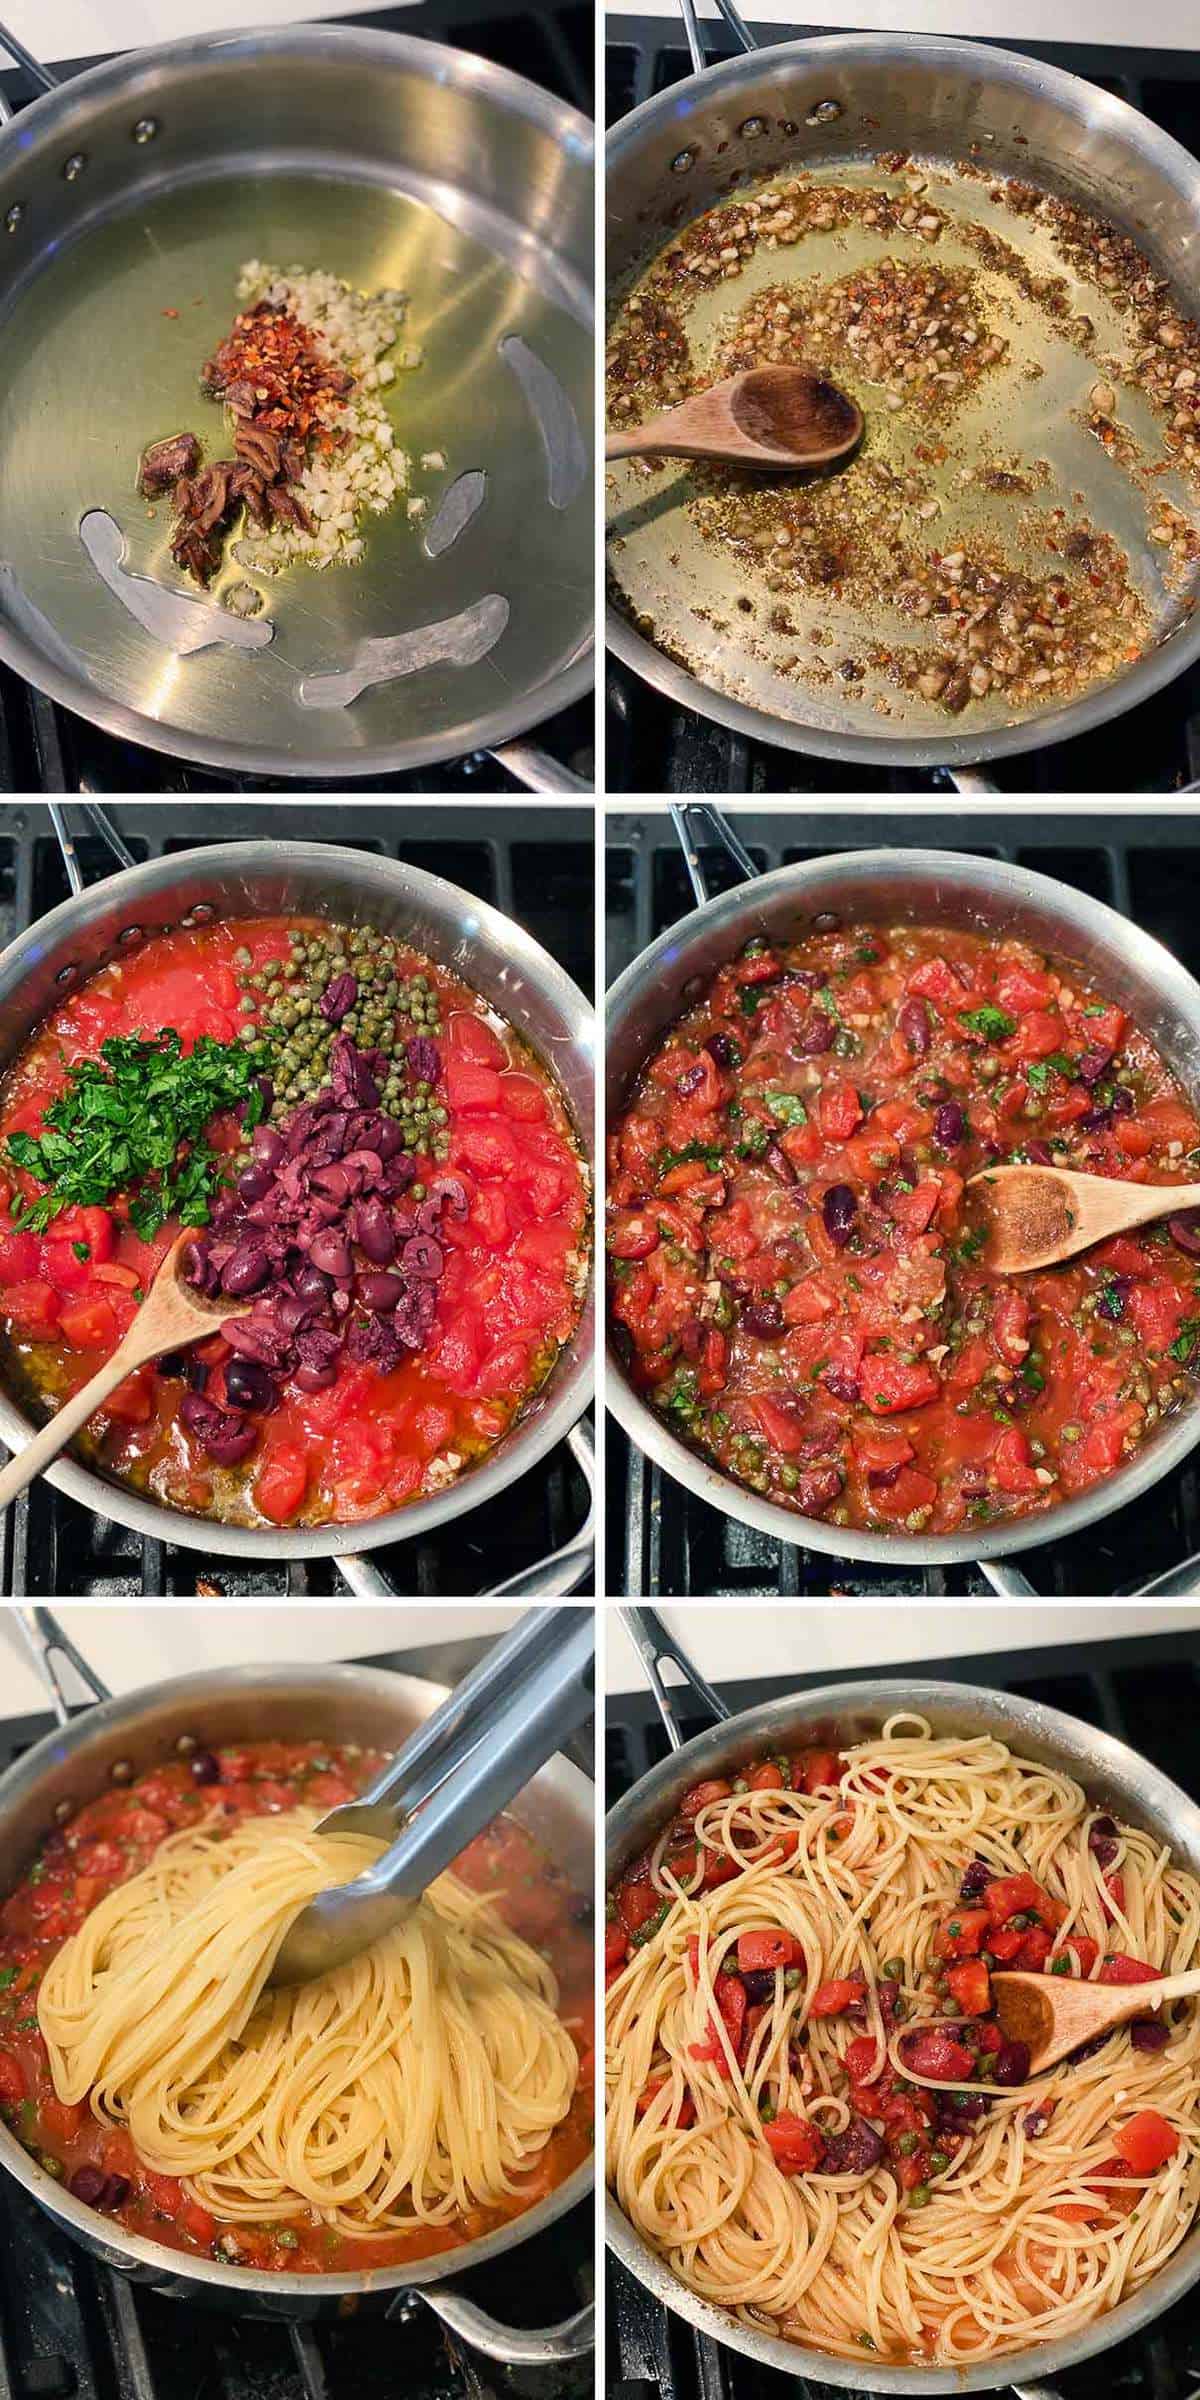 Process collage showing how to make puttanesca pasta sauce and adding spaghetti to it in a large skillet.